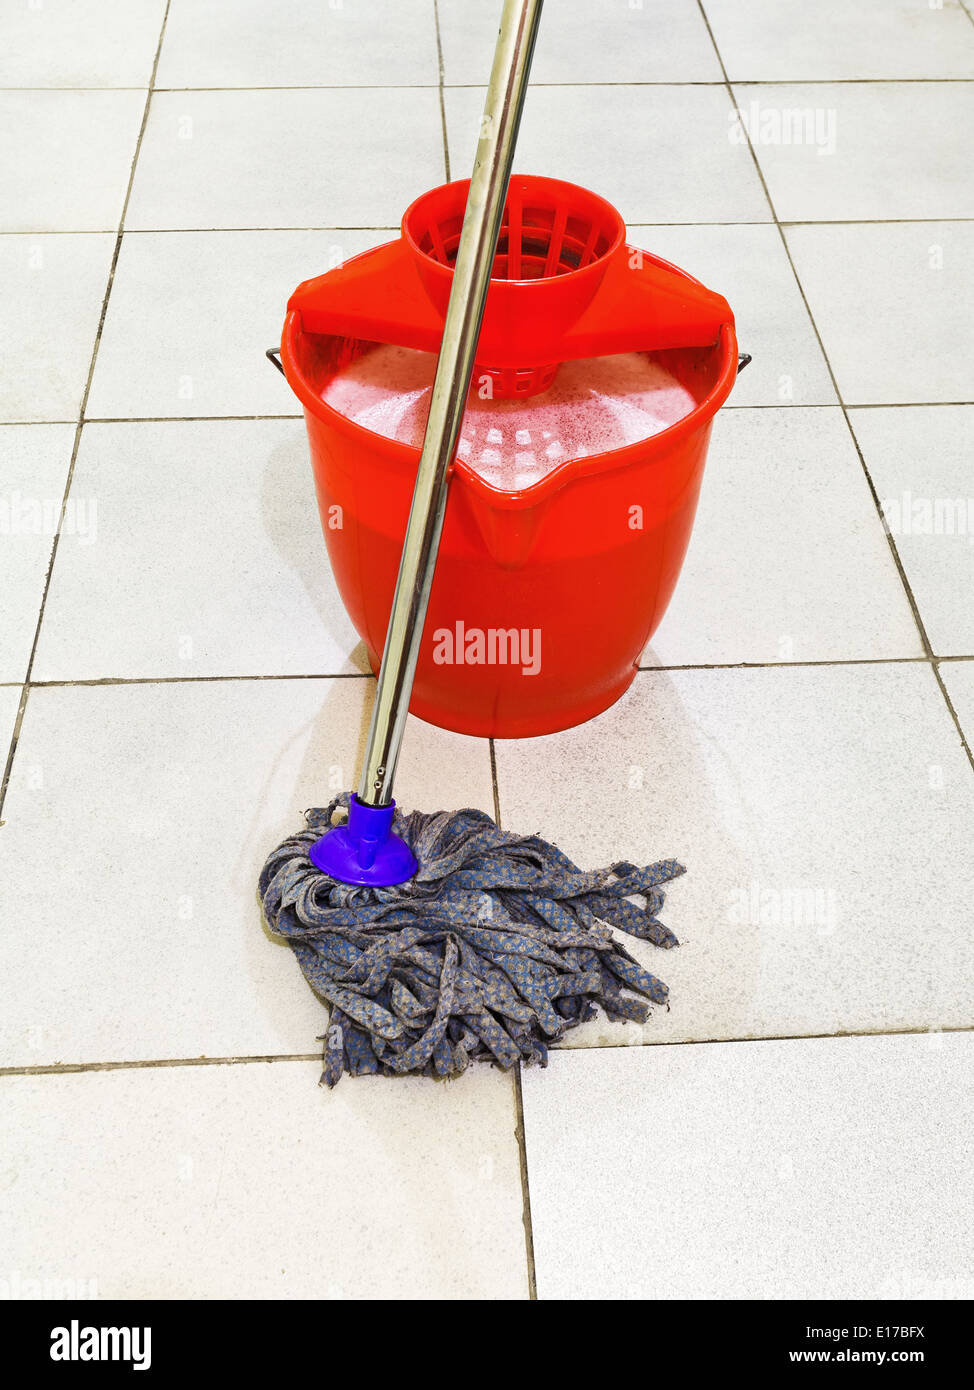 https://c8.alamy.com/comp/E17BFX/red-bucket-with-foamy-water-and-mop-the-tile-floors-E17BFX.jpg